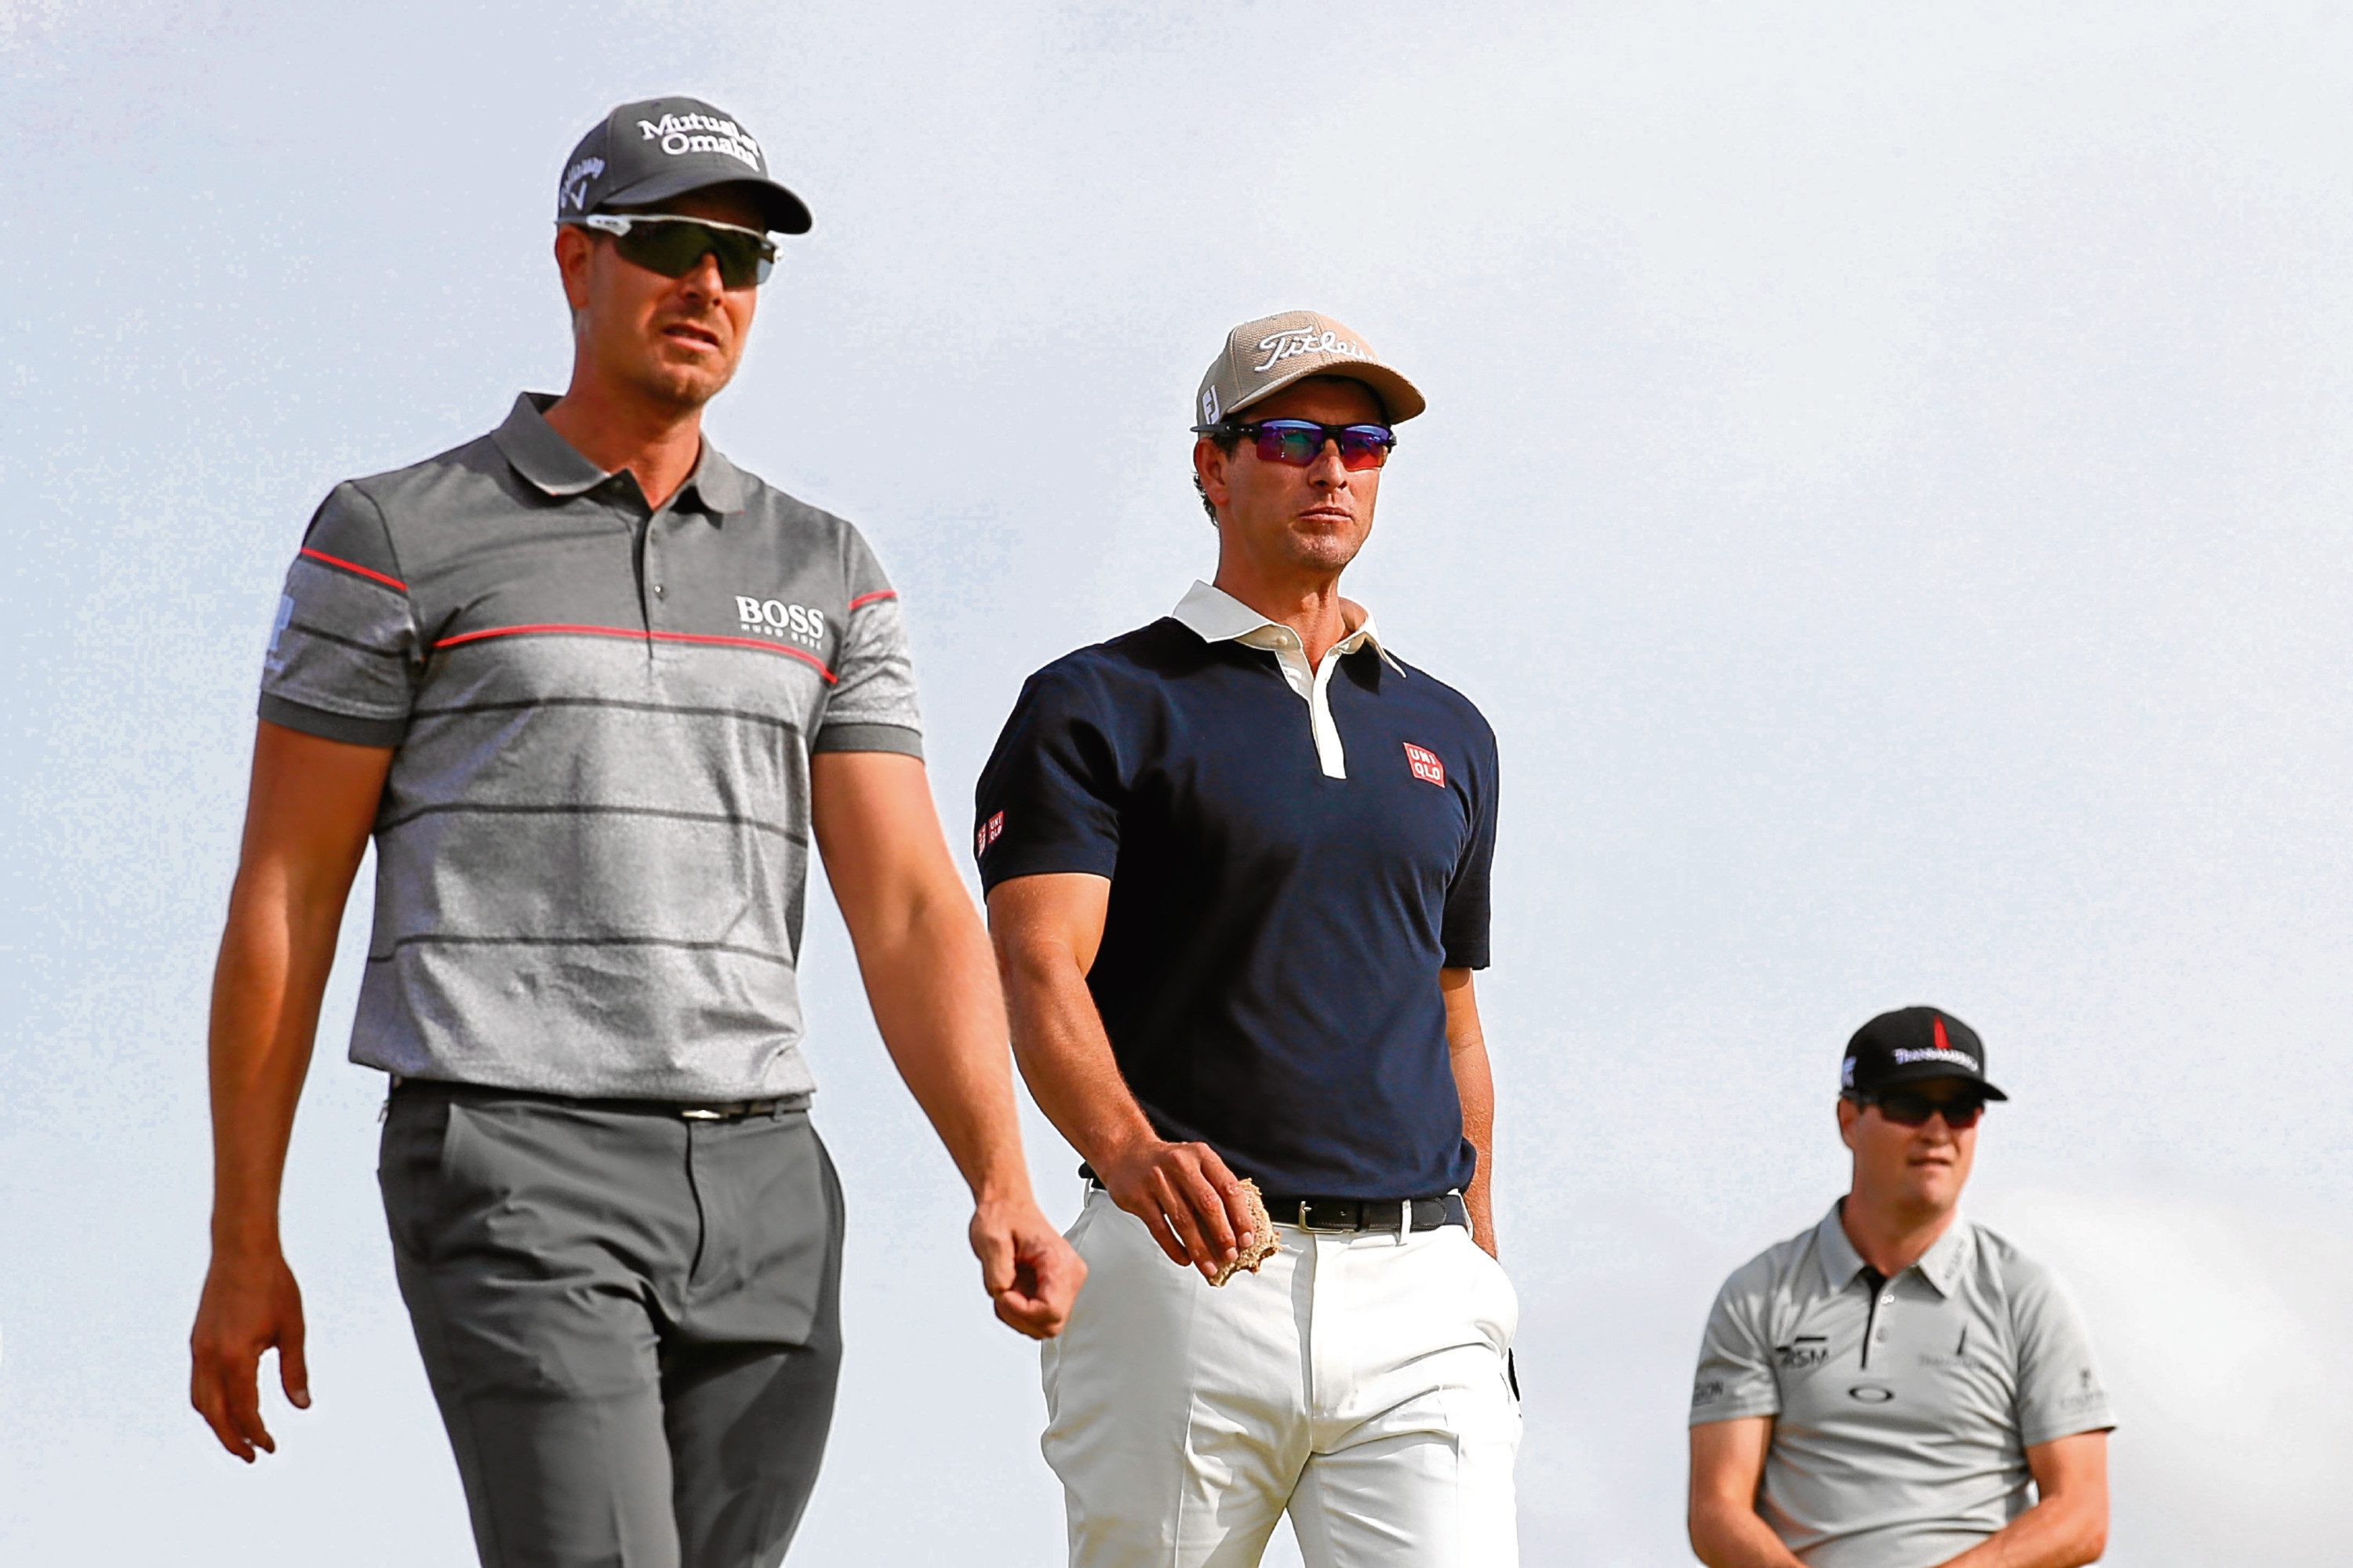 Henrik Stenson, Adam Scott and Zach Johnson on the first day at Troon. The Swede wasn't to be the odd man out of the trio for much longer...